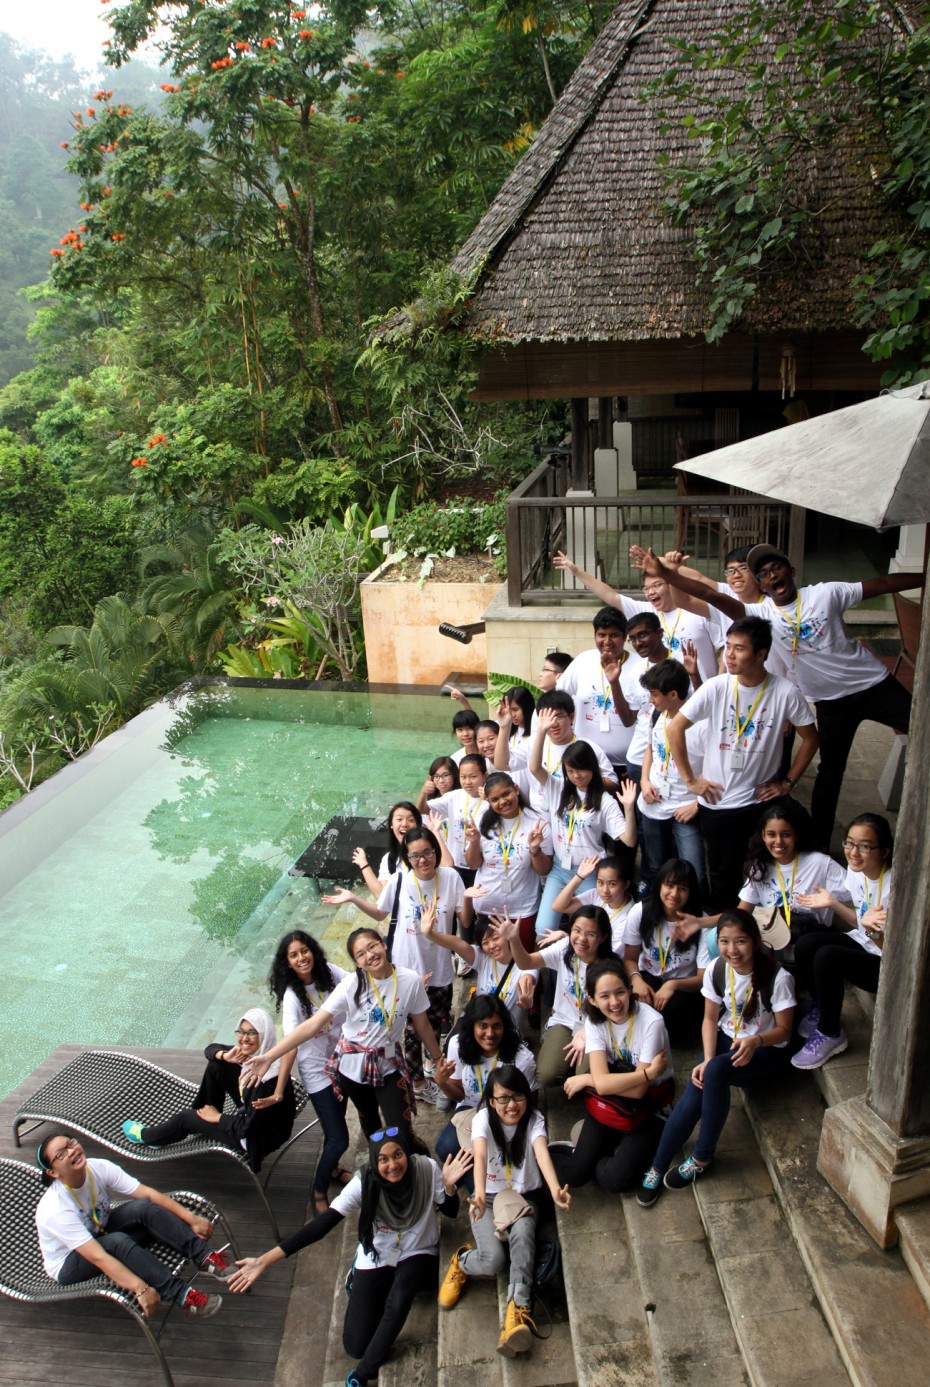 The new kids on the block: The BRATs Raub participants found time in their packed schedules to pose for a picture. Staying at the luxurious Casabrina Resort had definitely helped to lower stress levels. Photos: SAMUEL ONG/The Star